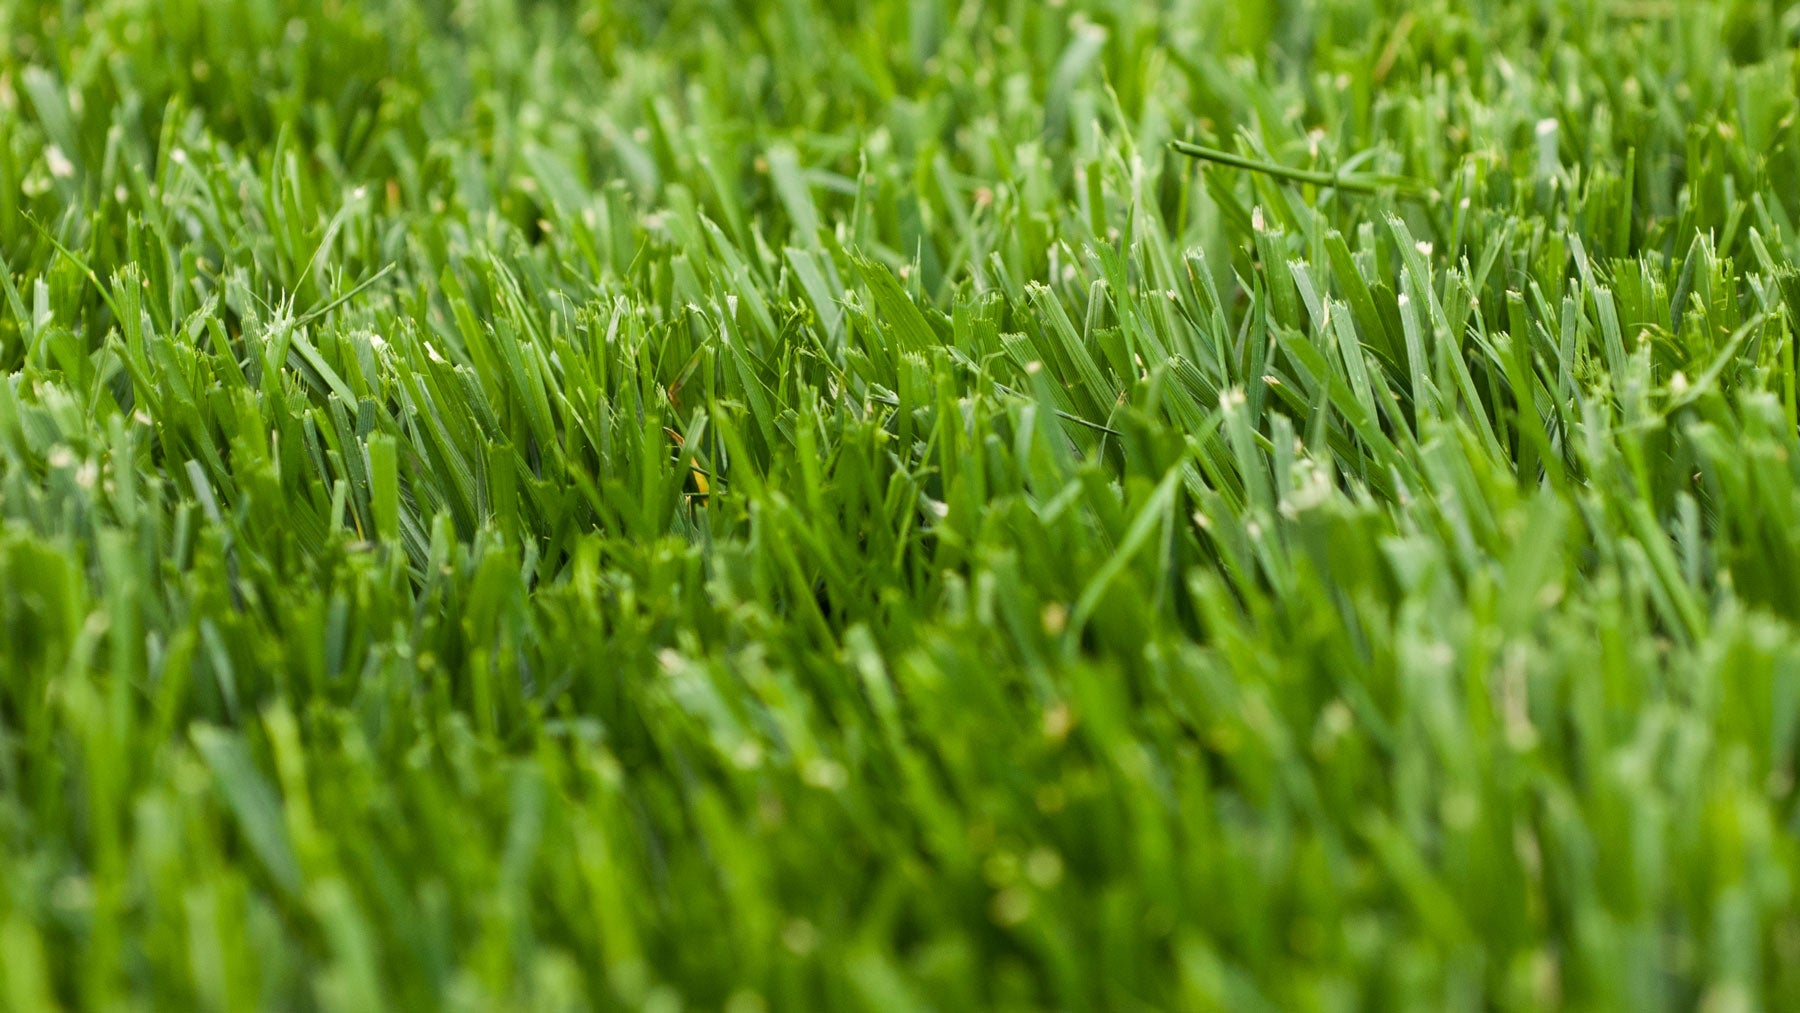 6 grass types every golfer should know, and how each affects your game